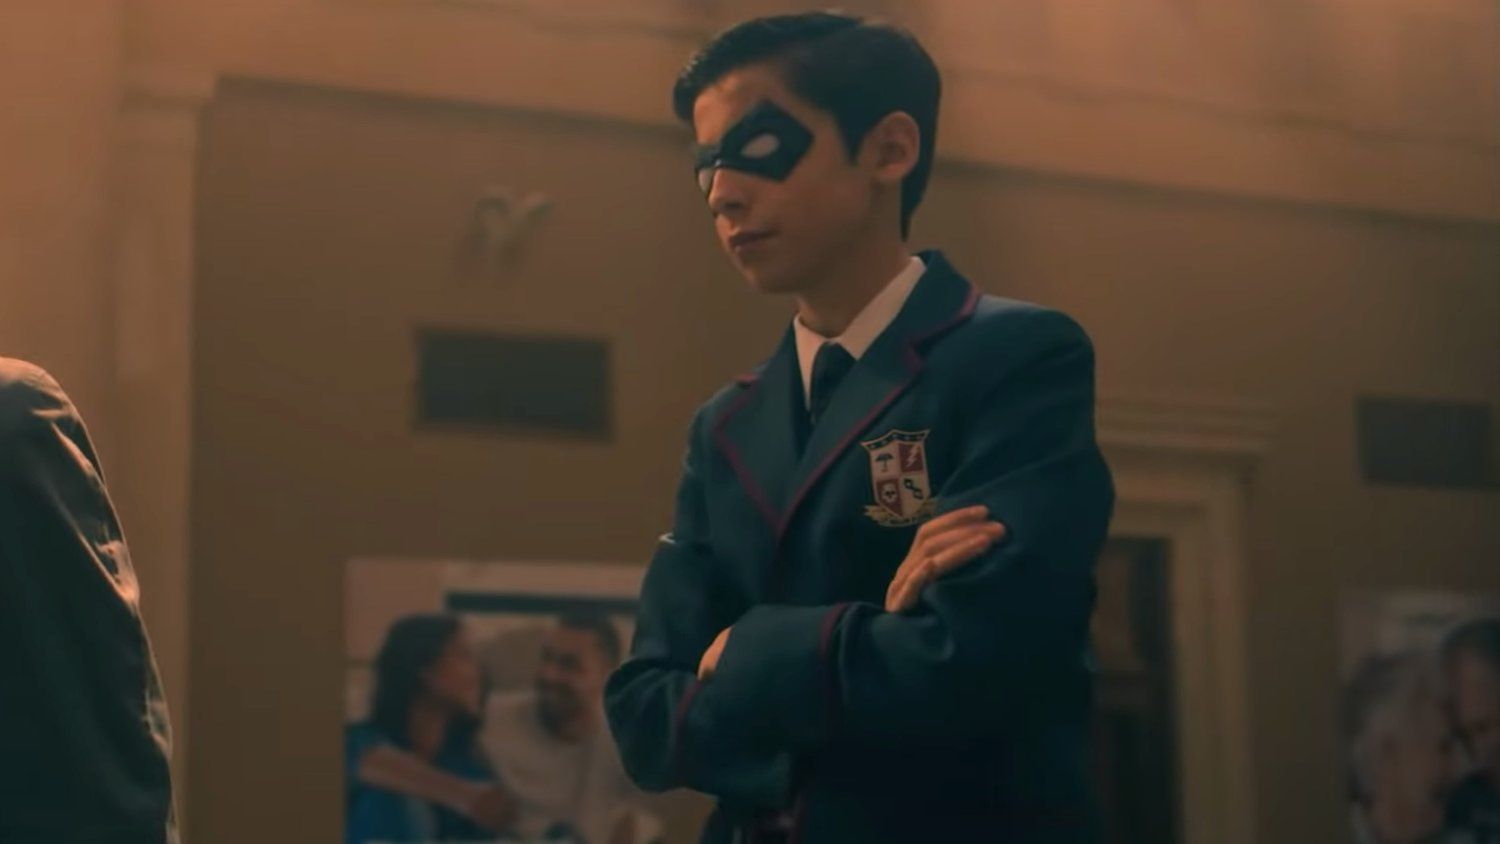 Fun First For Netflix's Adaptation of THE UMBRELLA ACADEMY